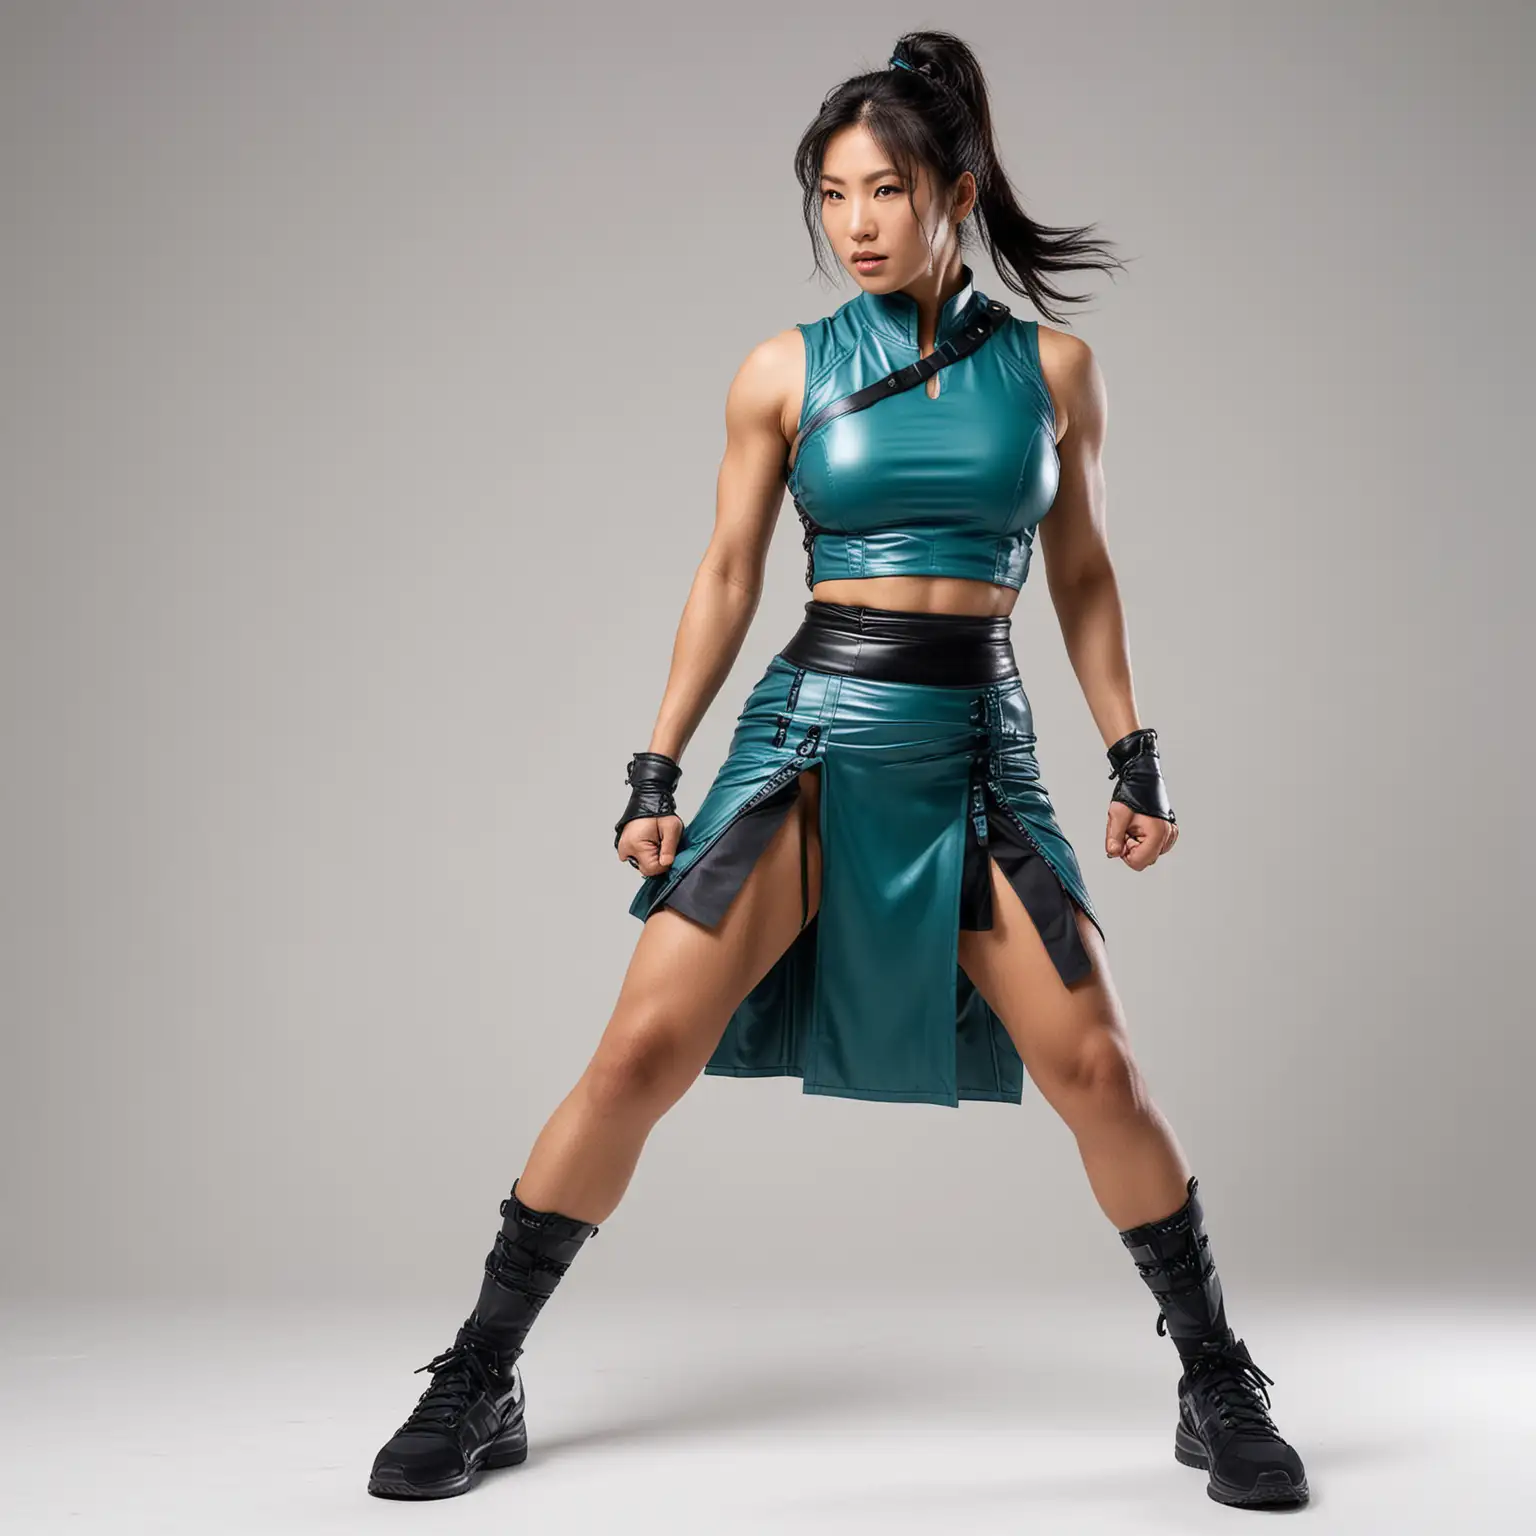 Strong muscular beautiful Japanese woman, wearing sleeveless light-saturated-teal double thigh slit chun-li dress made of leather, black shoulderpads, exposed midriff, black sneakers, sneakers, white background